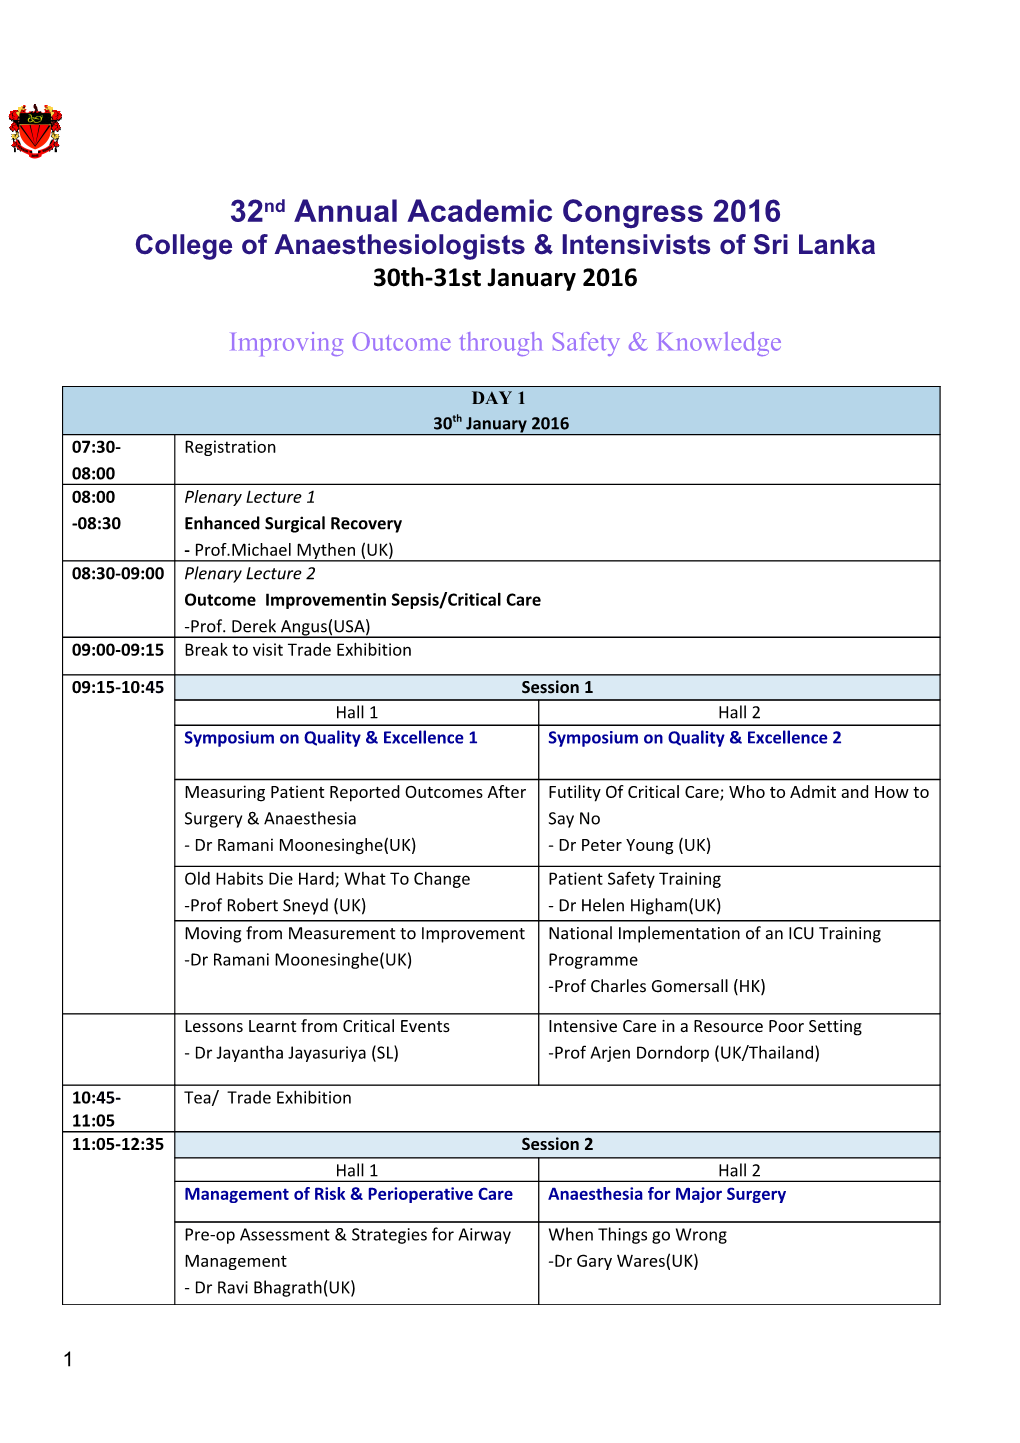 College of Anaesthesiologists & Intensivists of Sri Lanka